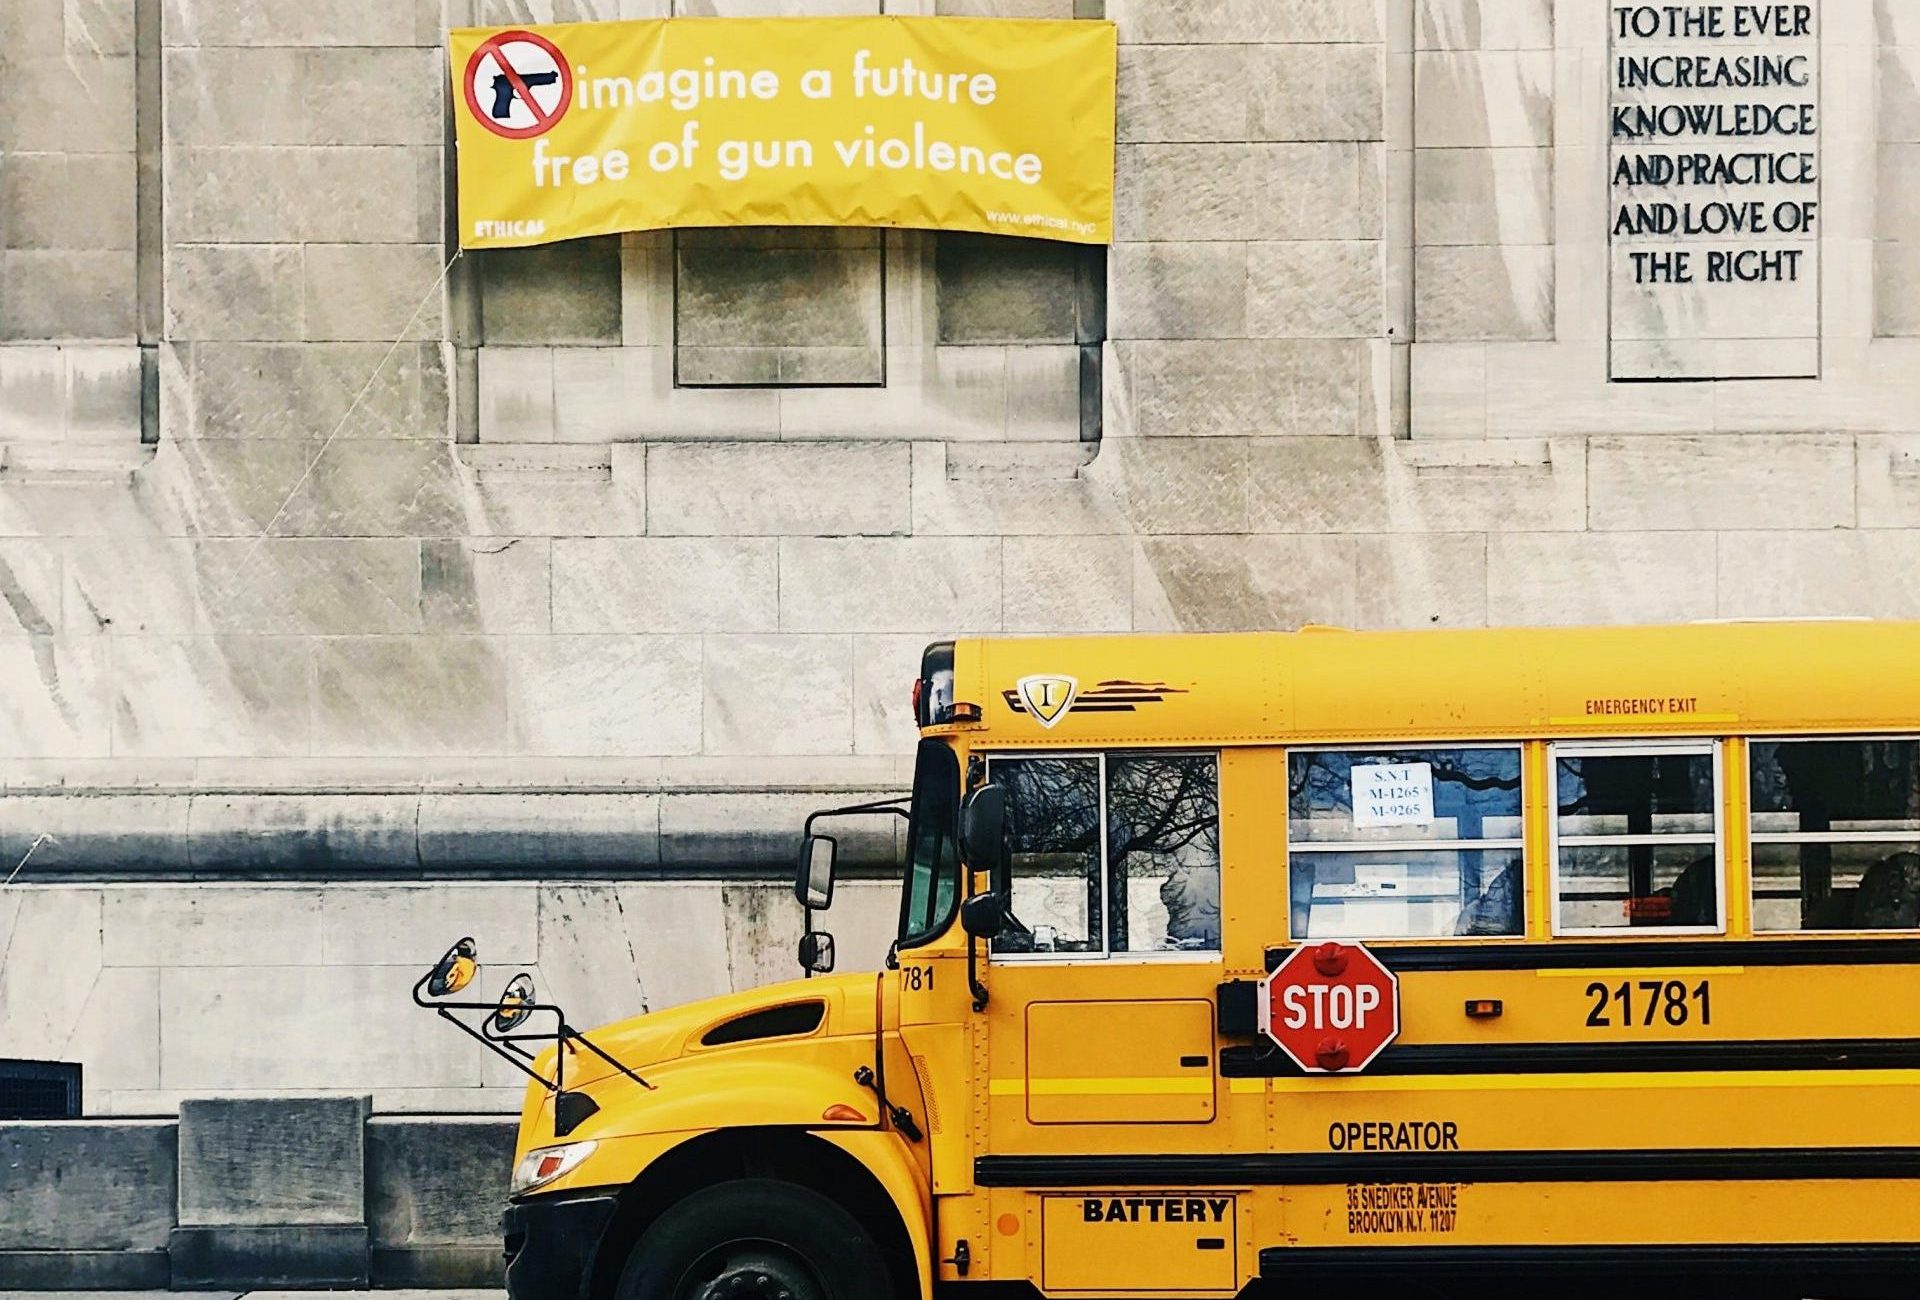 Image of school bus and sign reading, "Imagine a future free of gun violence."